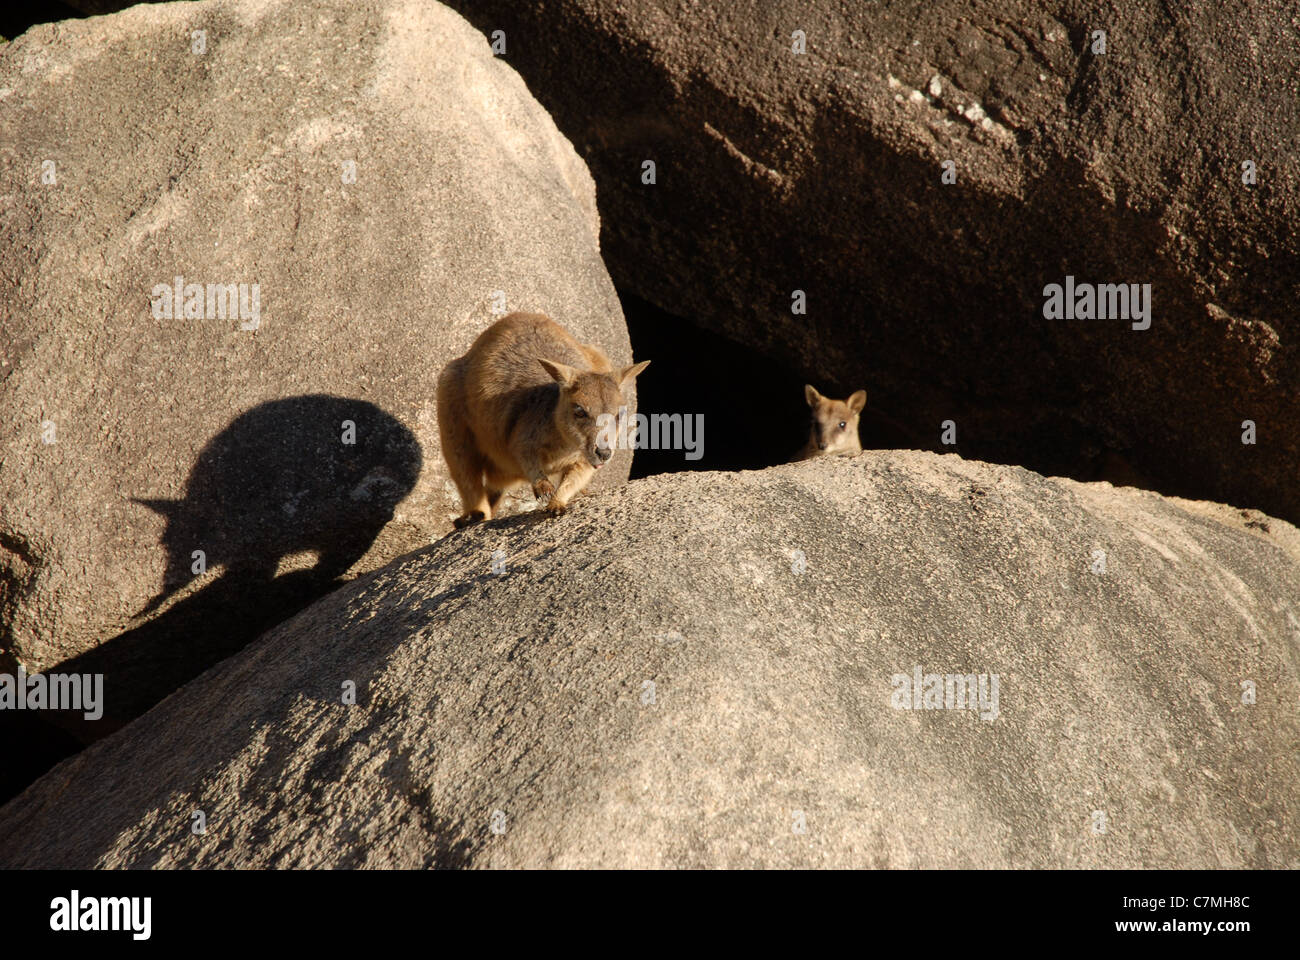 allied Rock wallaby (Petrogale assimilis), Geoffrey Bay, Magnetic Island, Townsville, Queensland, Australia Stock Photo